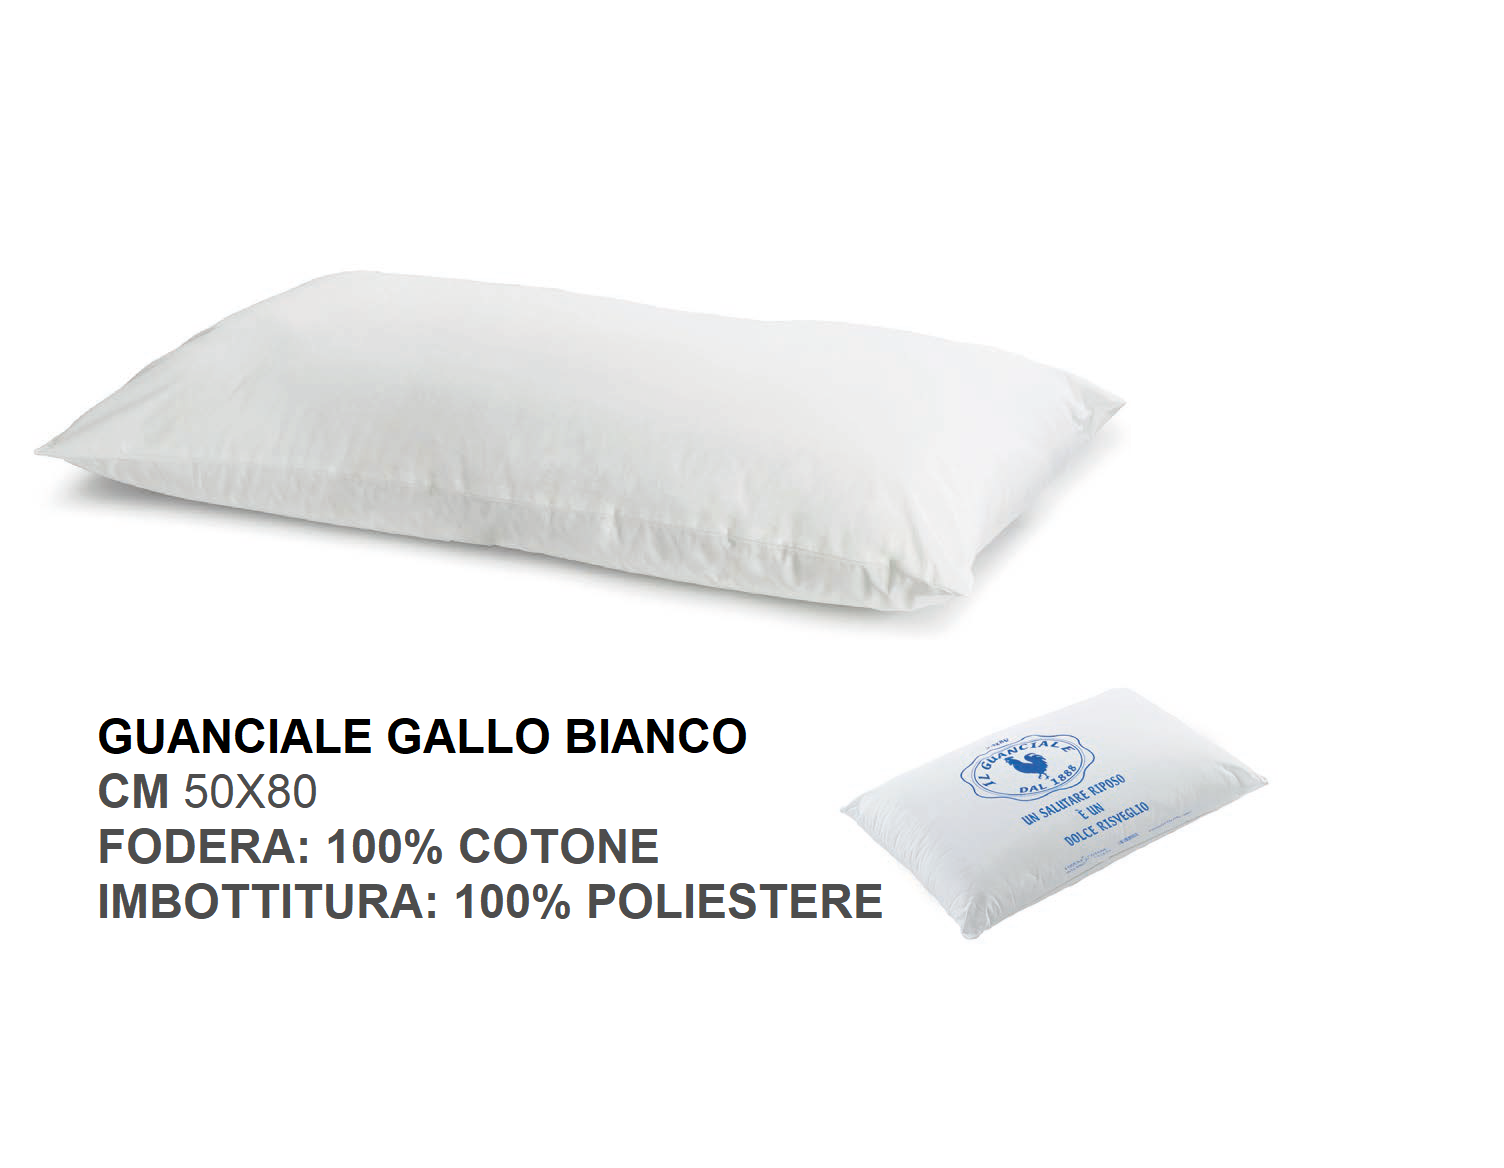 GUANCIALE GALLO BIANCOLovely Home